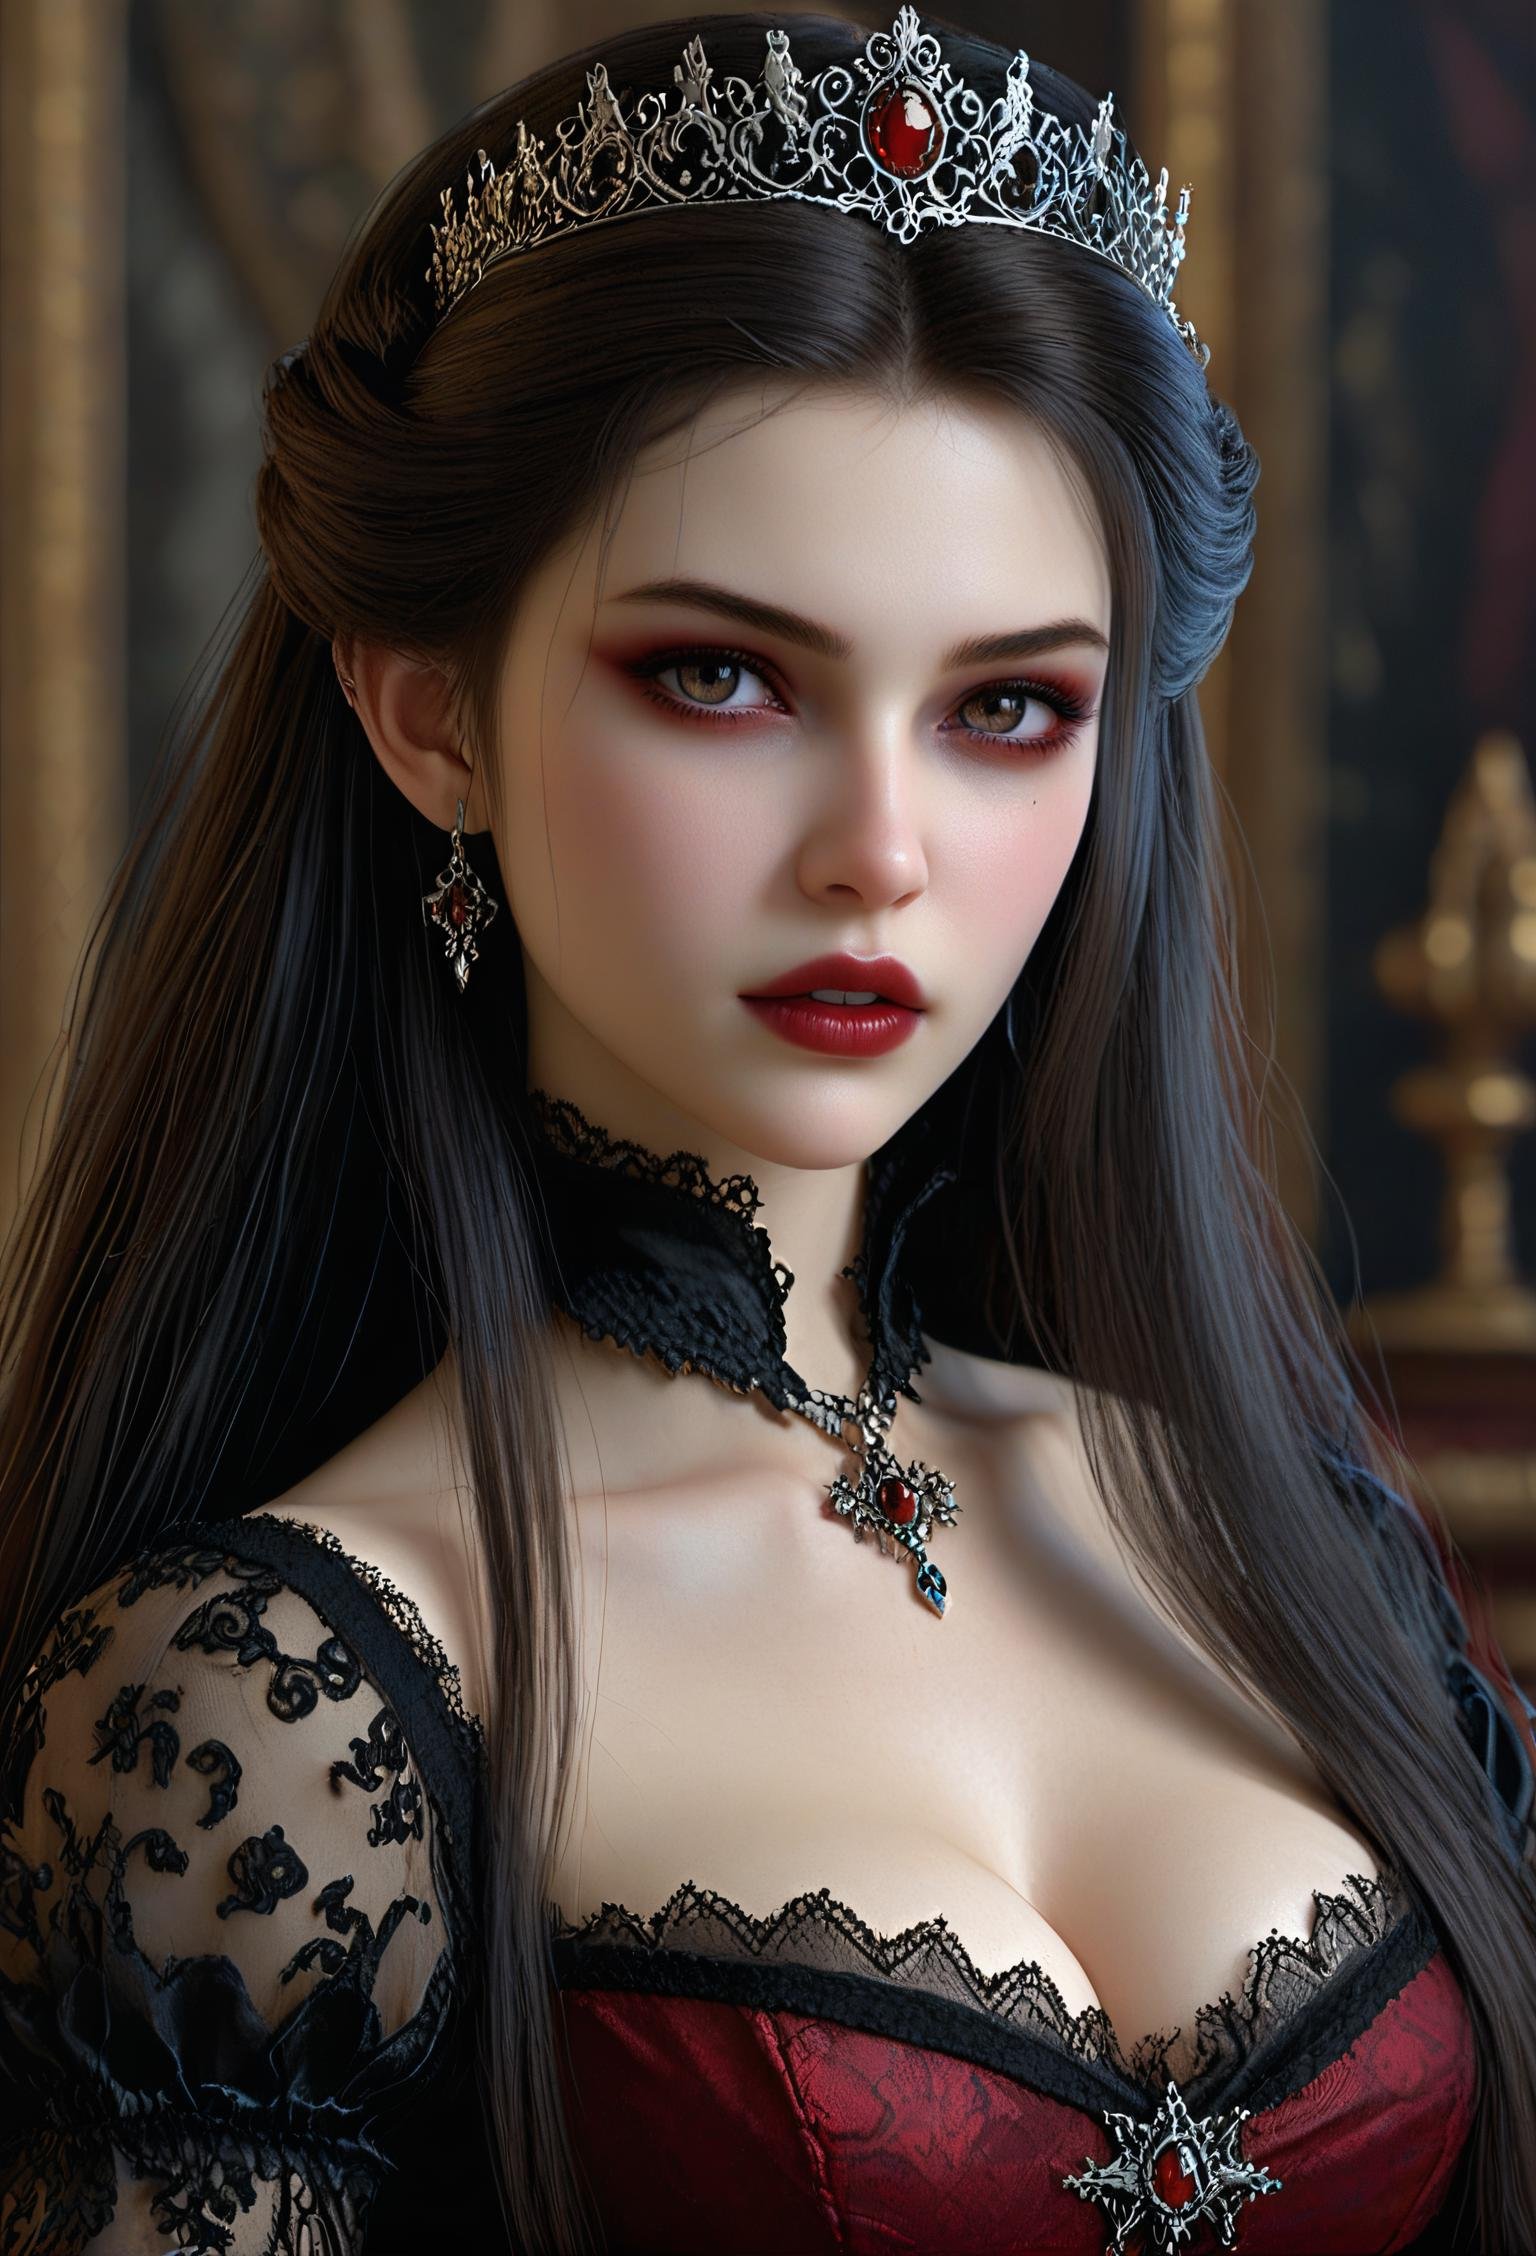 A hyper realistic ultra detailed photo of vampire princess